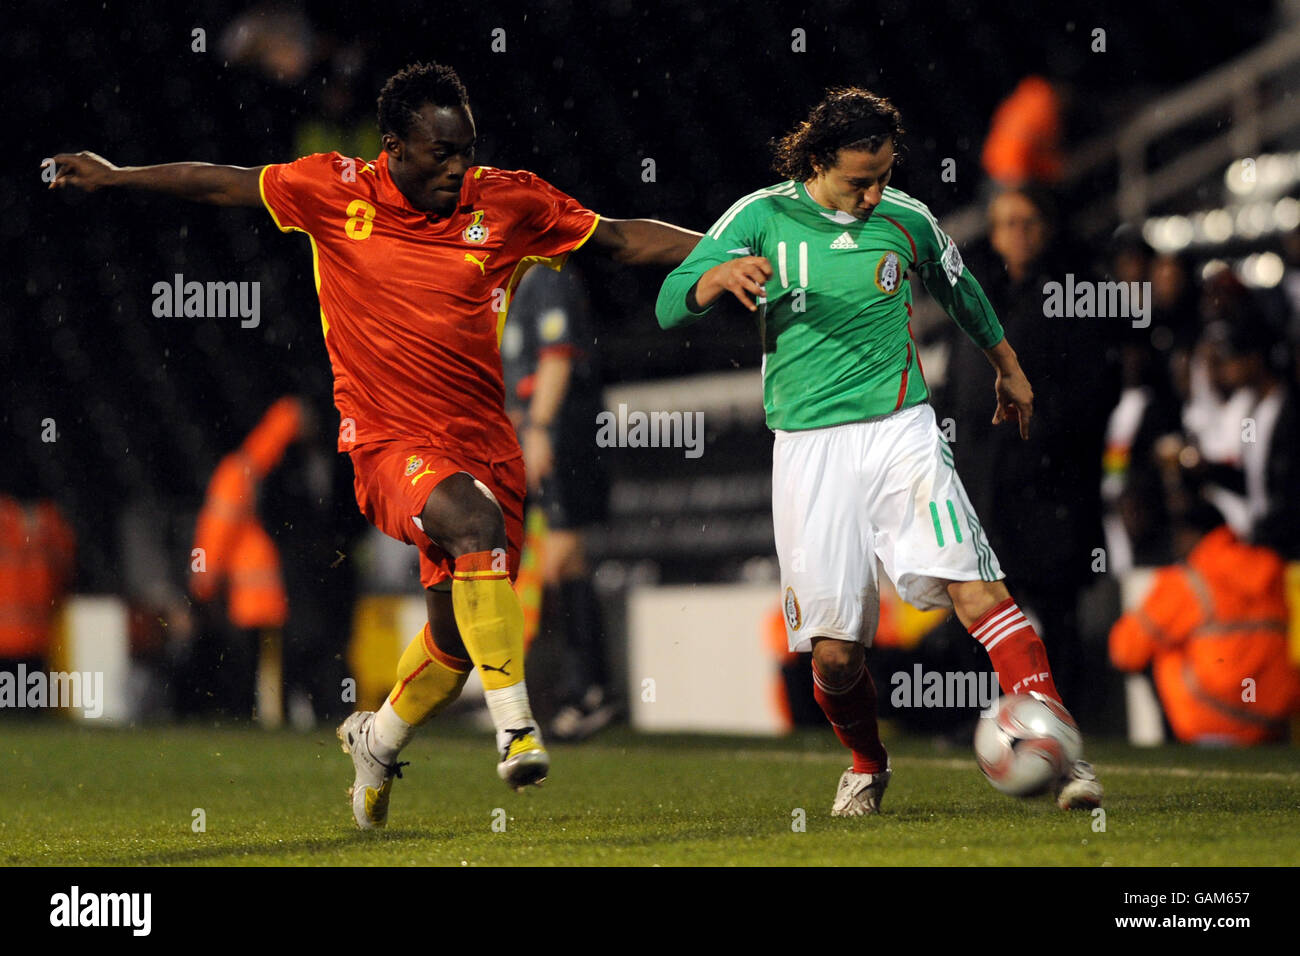 Ghana's Michael Essien (l) and Mexico's Andres Guardado battle for the ball Stock Photo